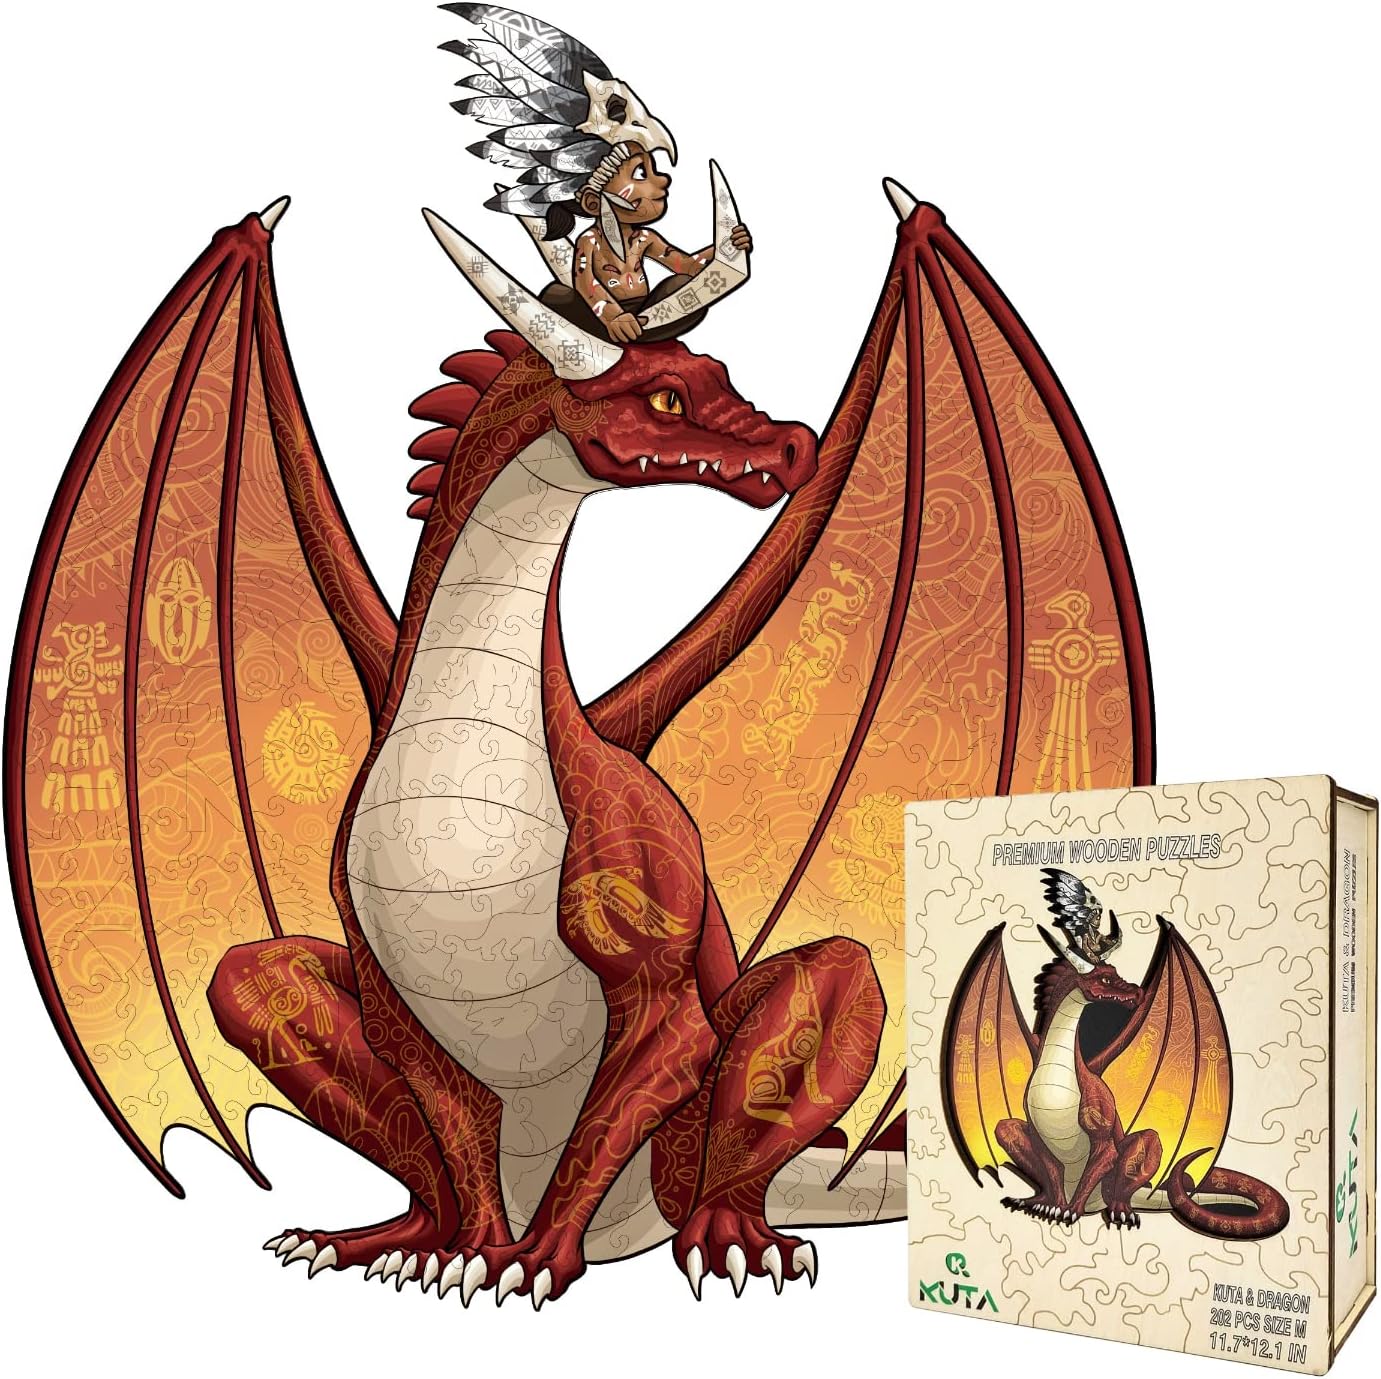 KUTA Wooden Jigsaw Puzzles, Unique Animal Shape, Set with Wall Mounting Kits for Decoration, Best Gift for Children and Adults (Kuta&Dragon)